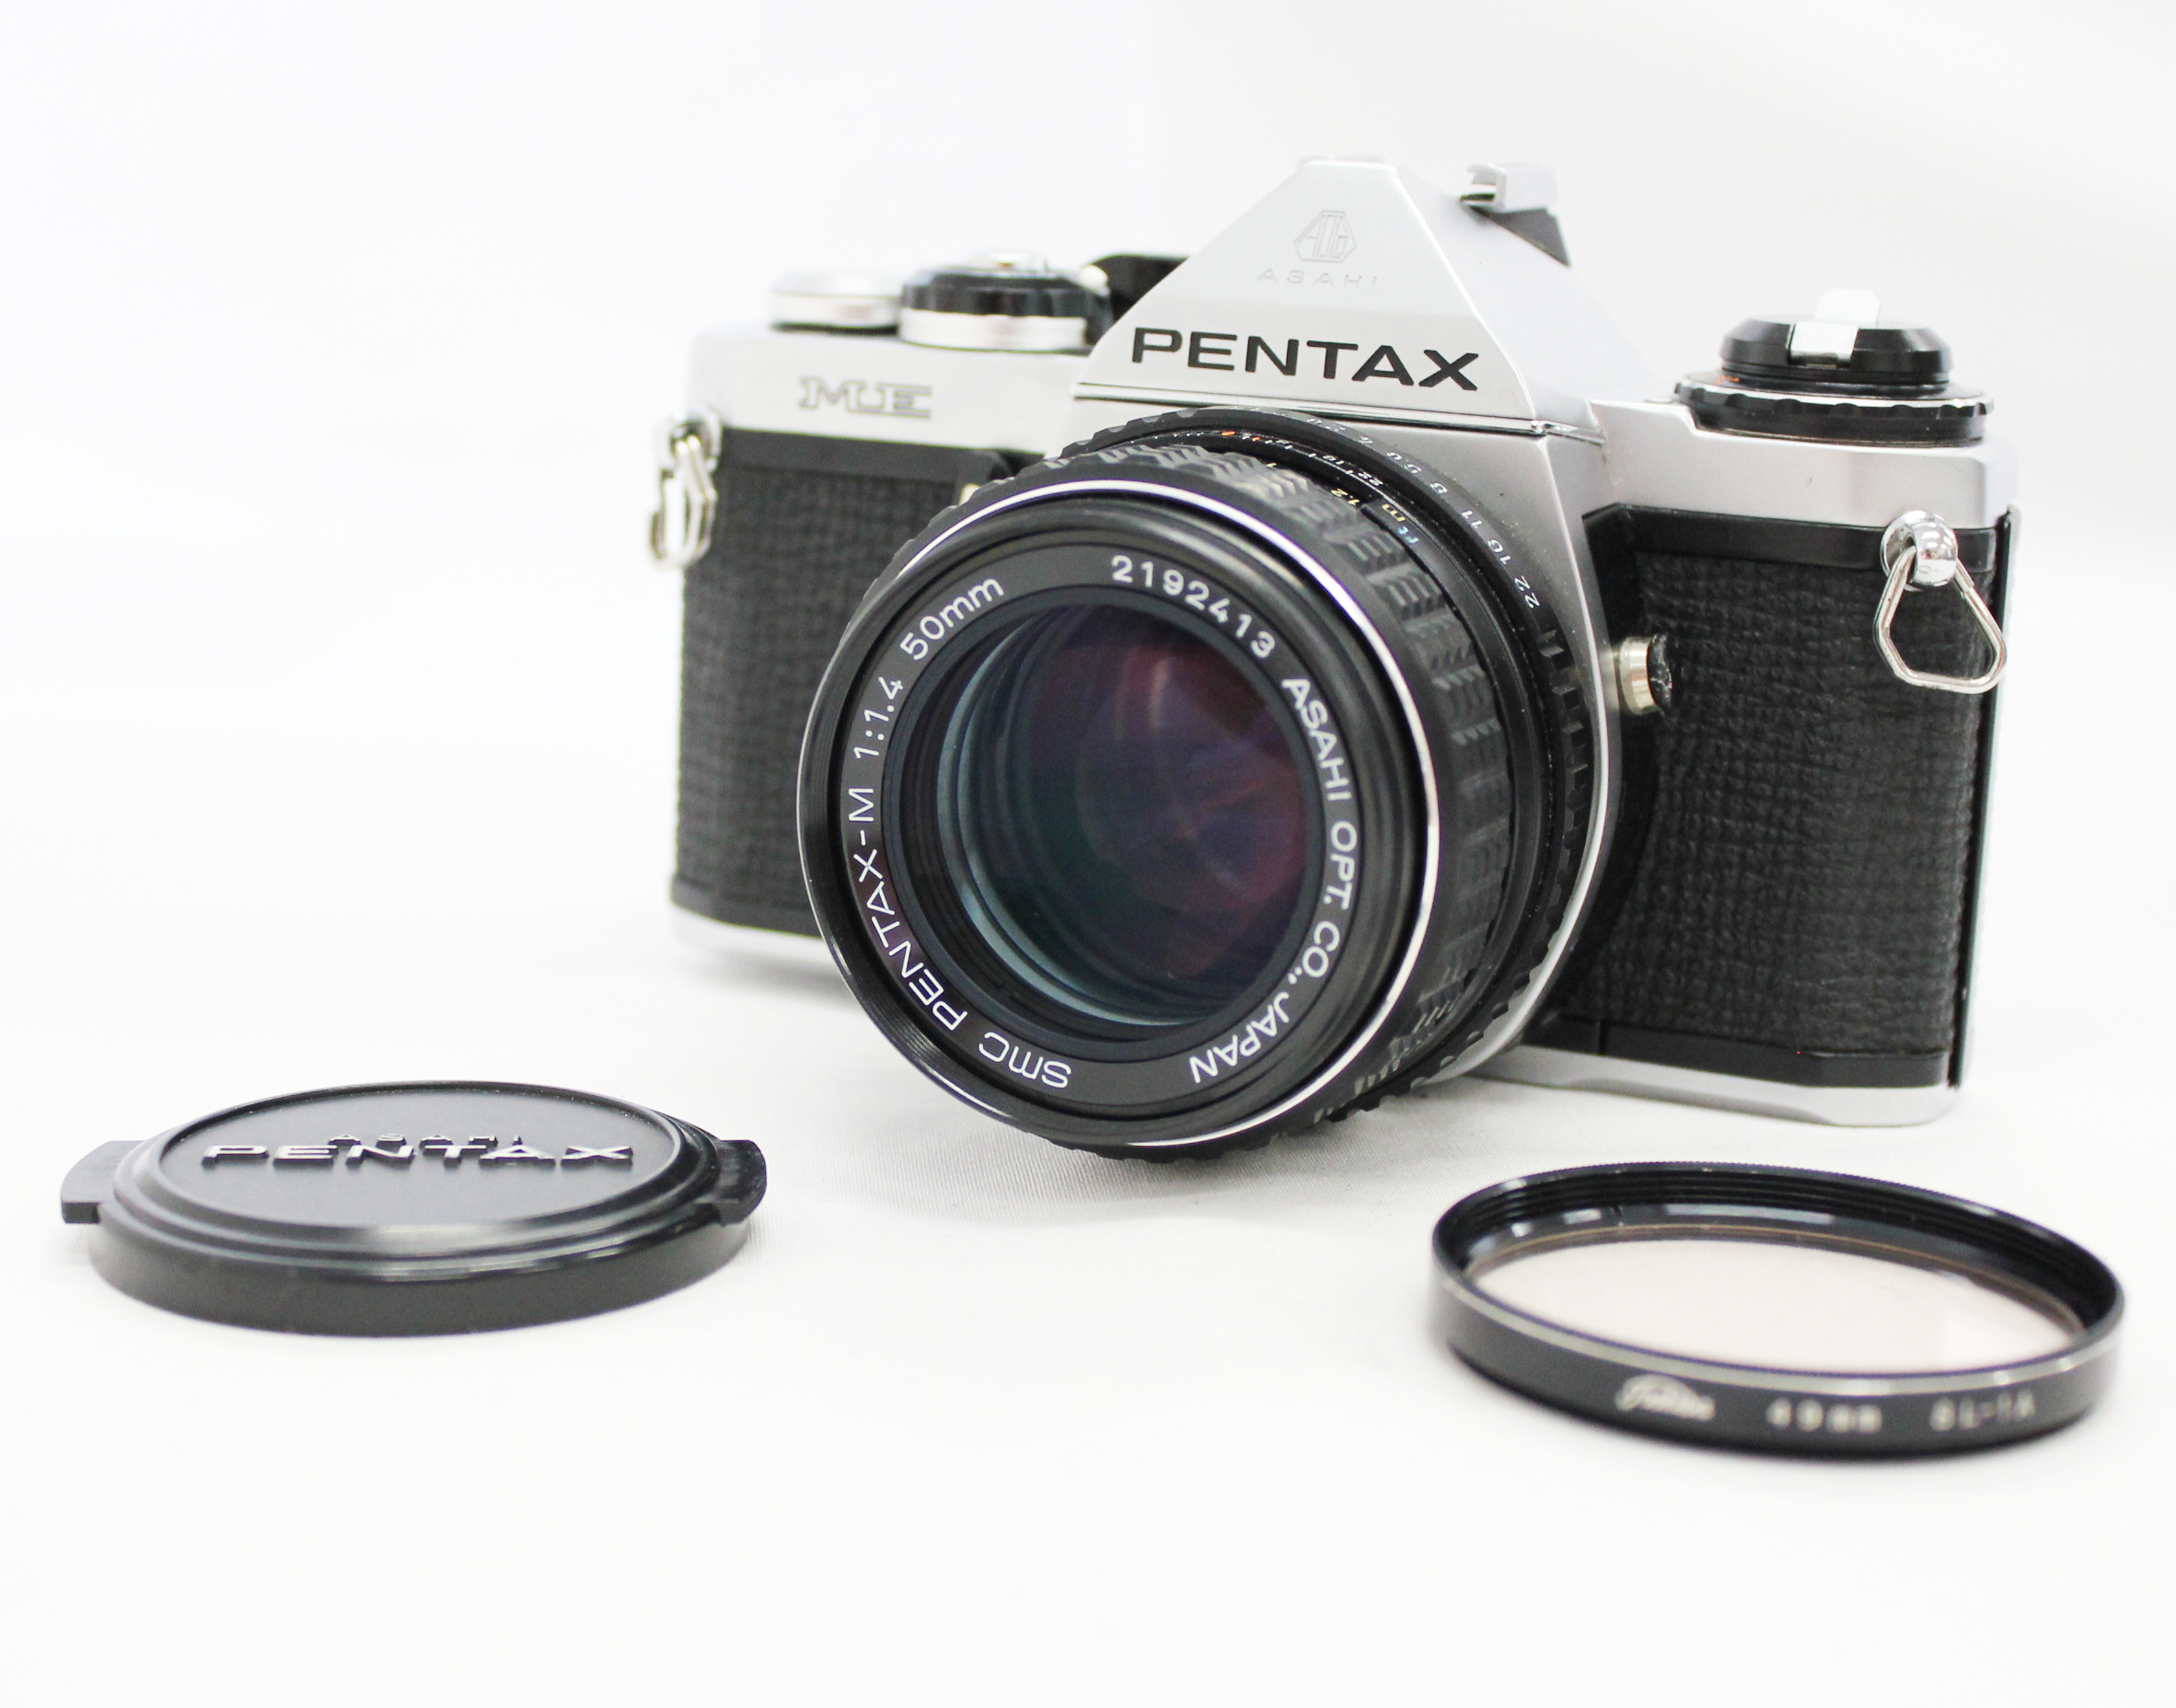 Japan Used Camera Shop | [Excellent++++] Pentax ME 35mm SLR Camera with smc Pentax-M 50mm F/1.4 Lens from Japan